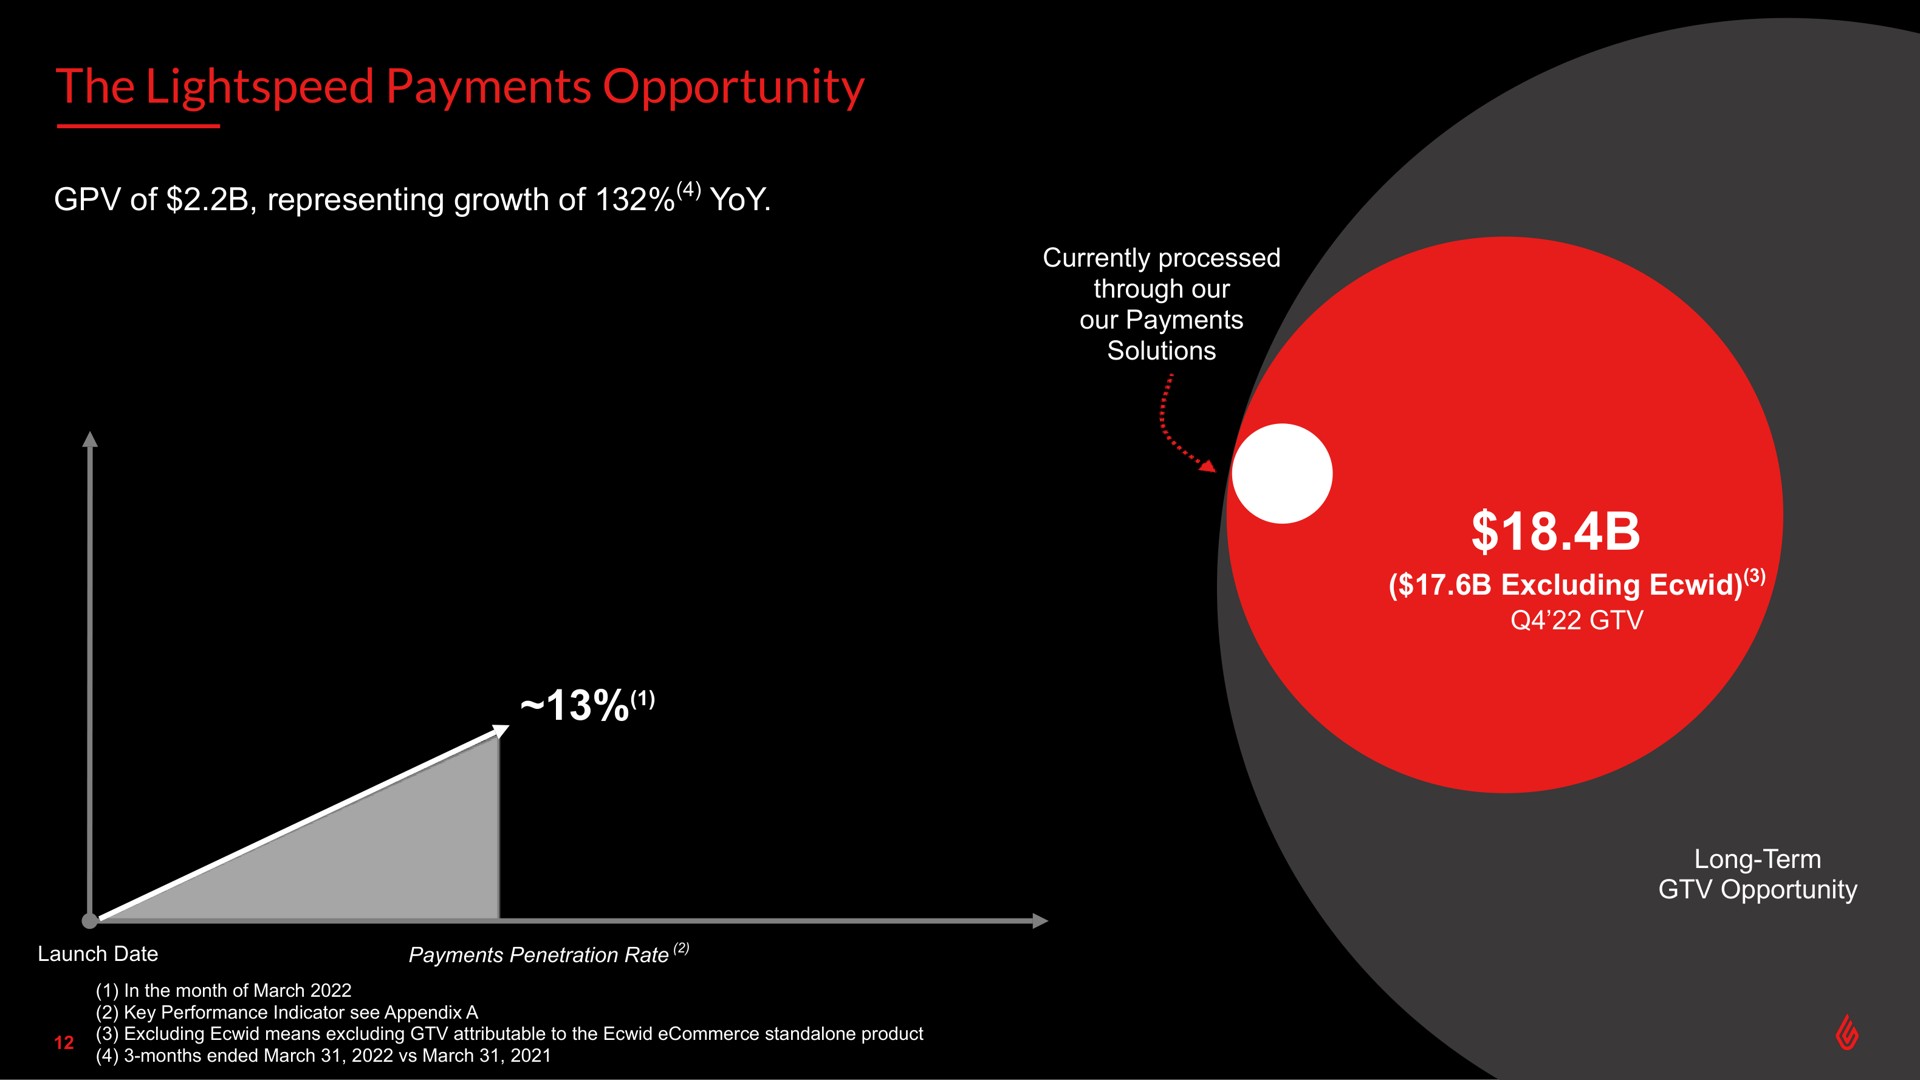 the payments opportunity of representing growth of yoy | Lightspeed